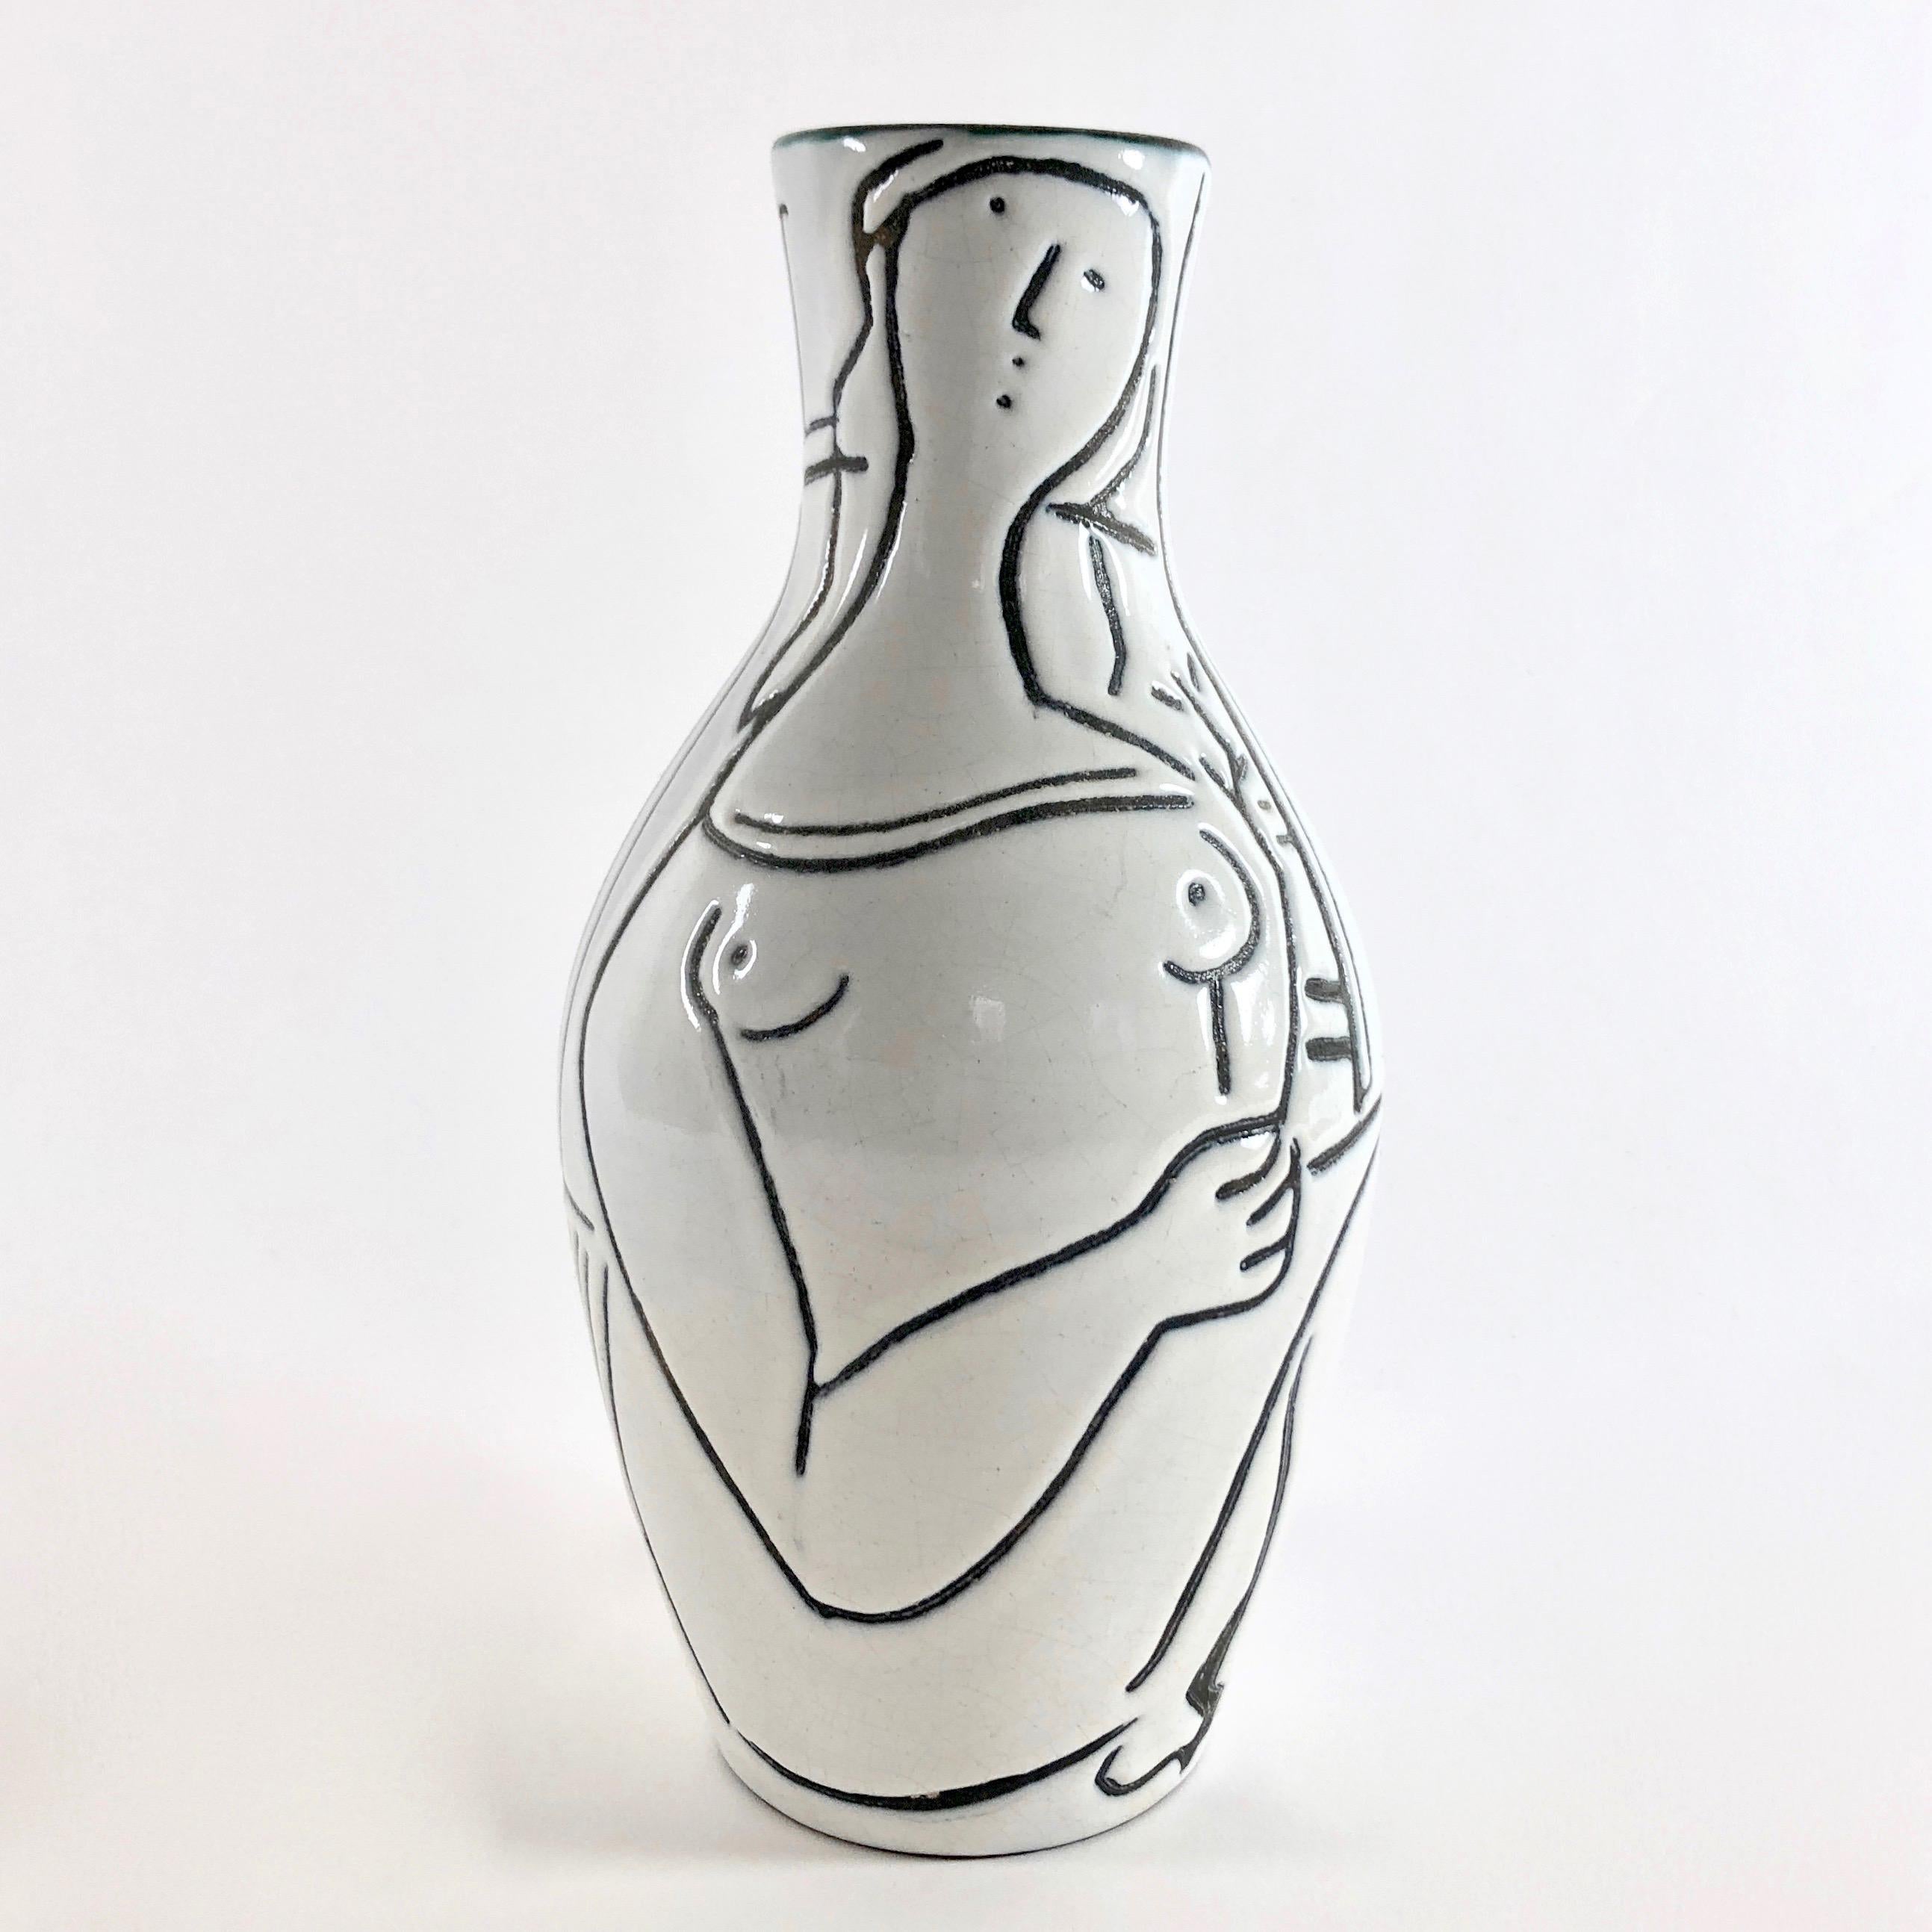 Ceramic vase, bottle shaped.
Vallauris red clay glazed in pure white and polychrome touches, decorated front and back with stylized female figures engraved in reserve on a black matte background.
A rare piece considering the dimensions. 

The